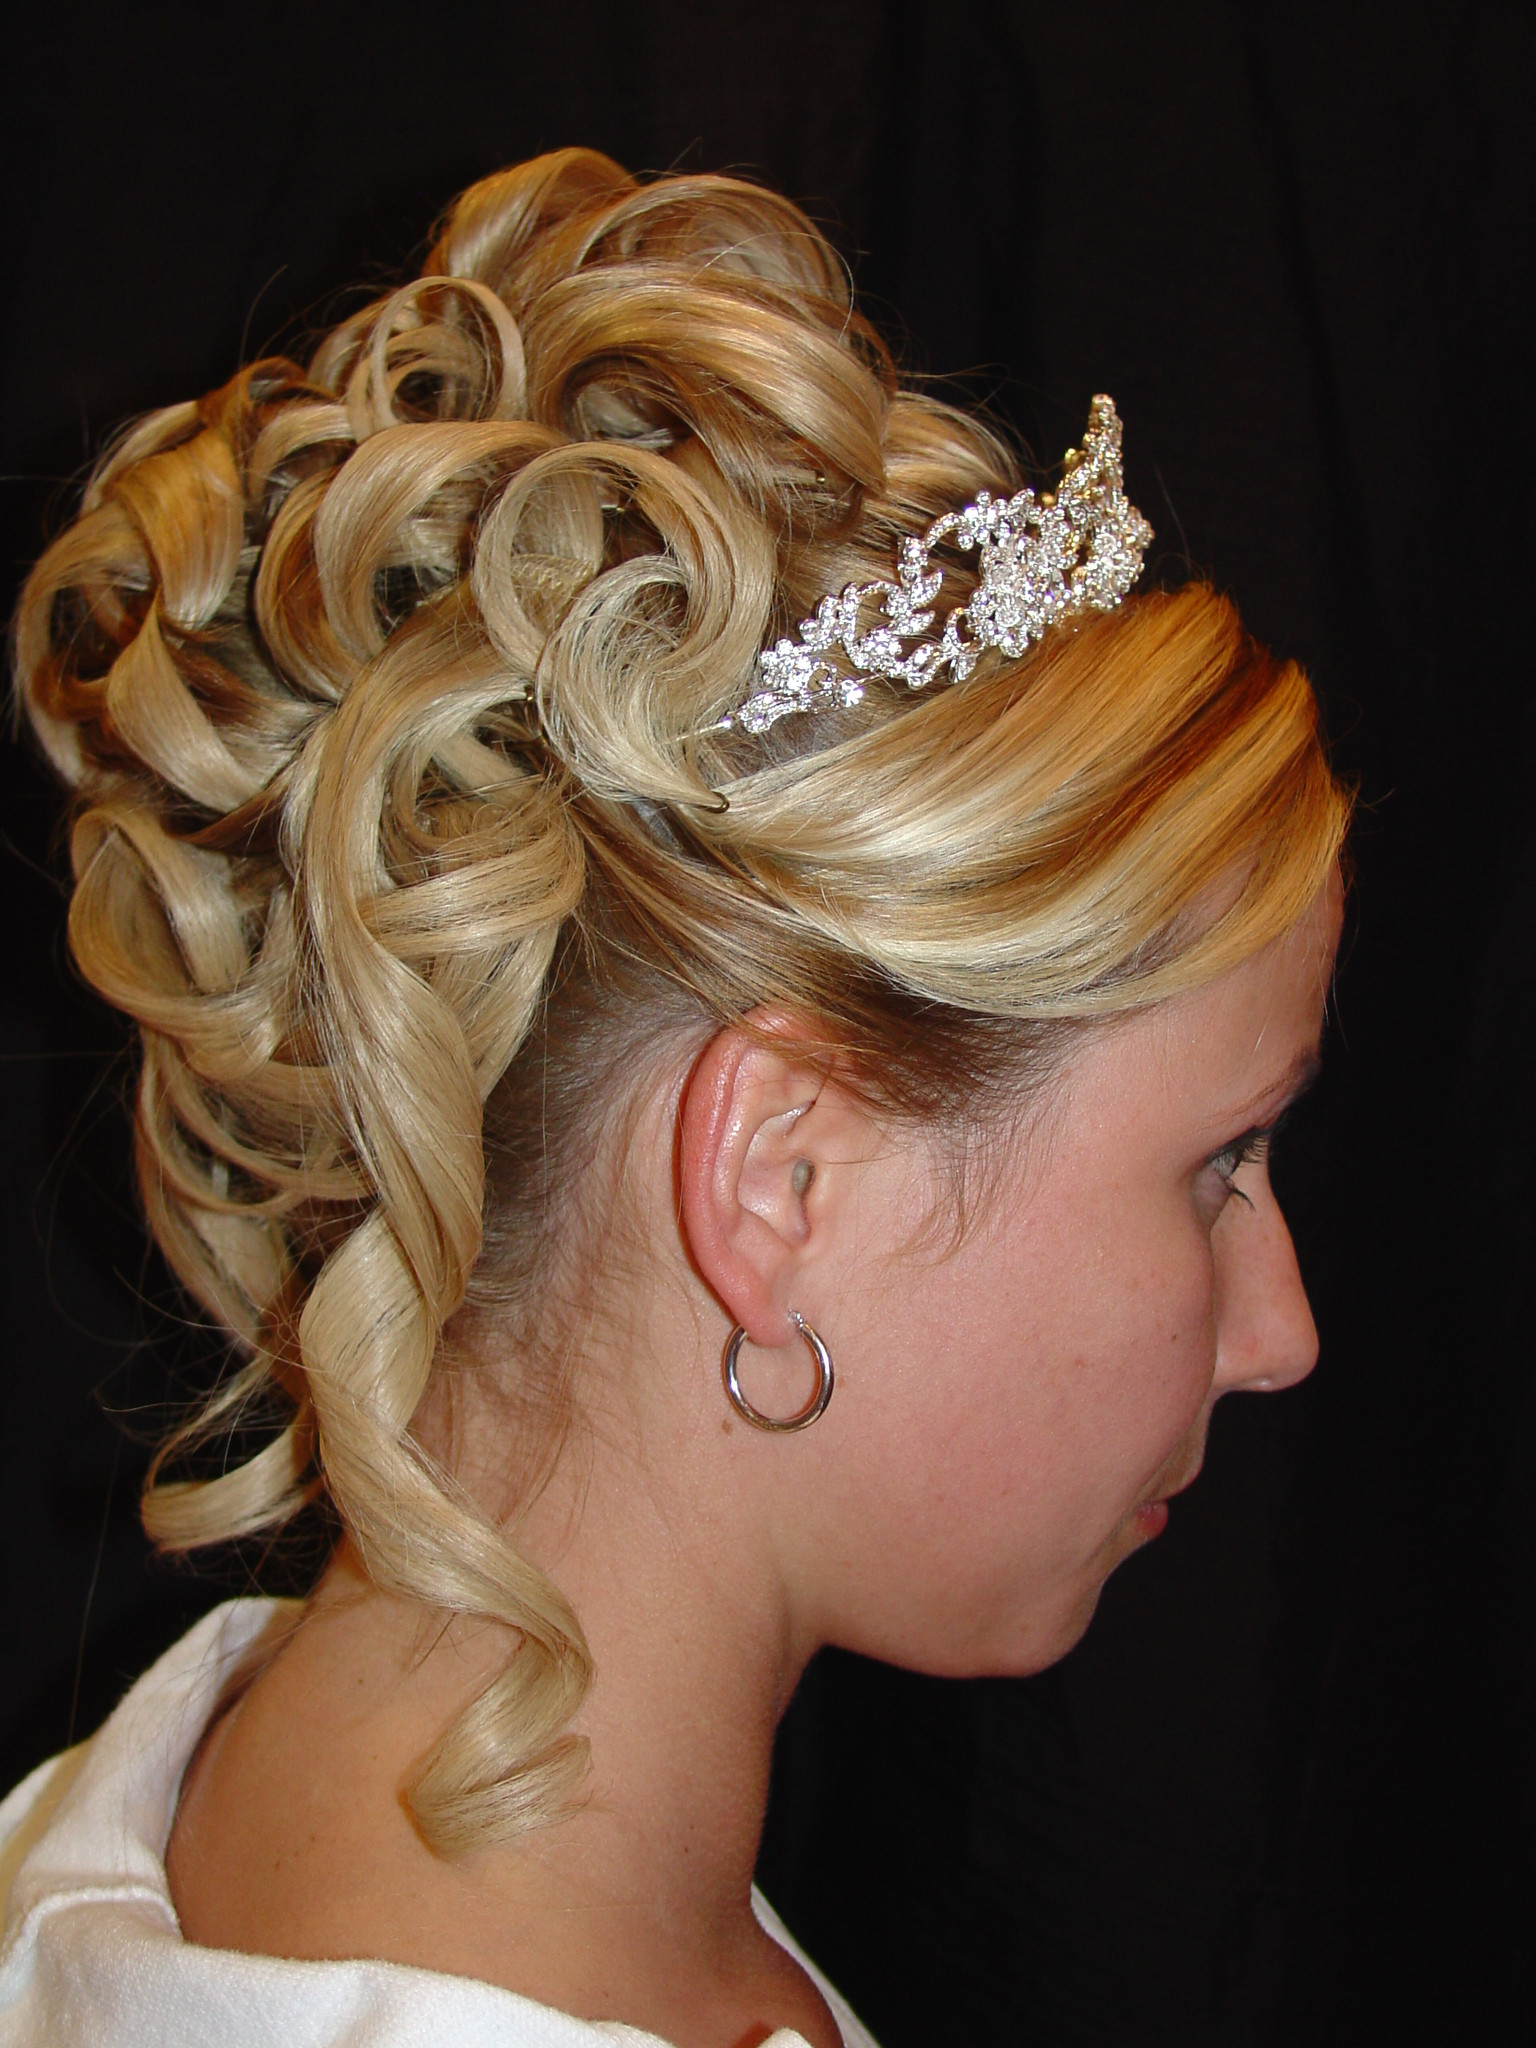 Cute Hairstyles For Prom
 Updo Hairstyles For Prom